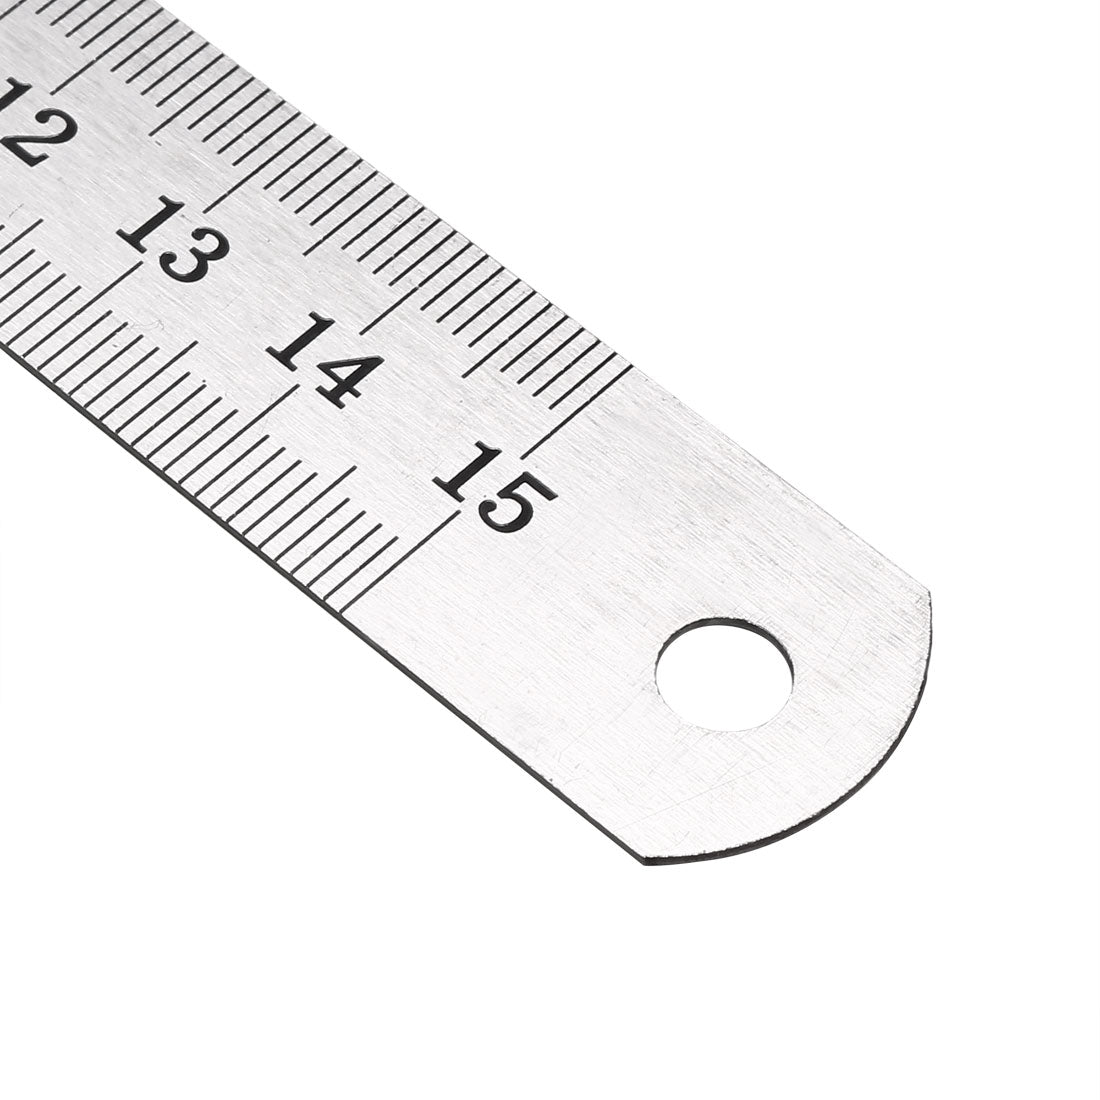 uxcell Uxcell Stainless Steel Ruler 6-inch (15cm) Straight Ruler Inches and Metric Scale